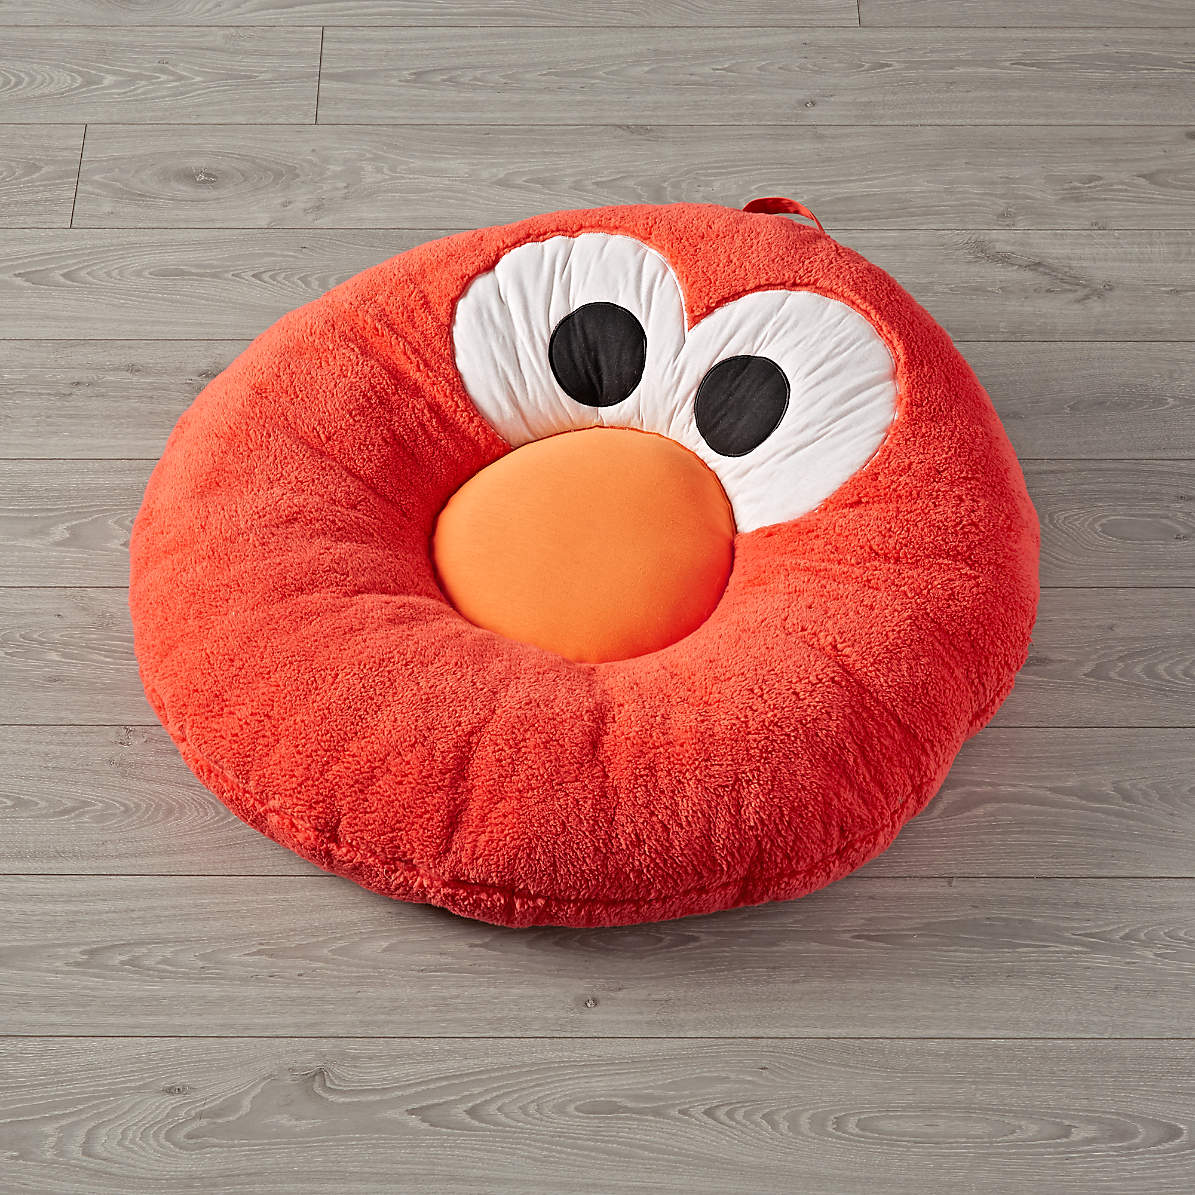 elmo toys for 3 year old